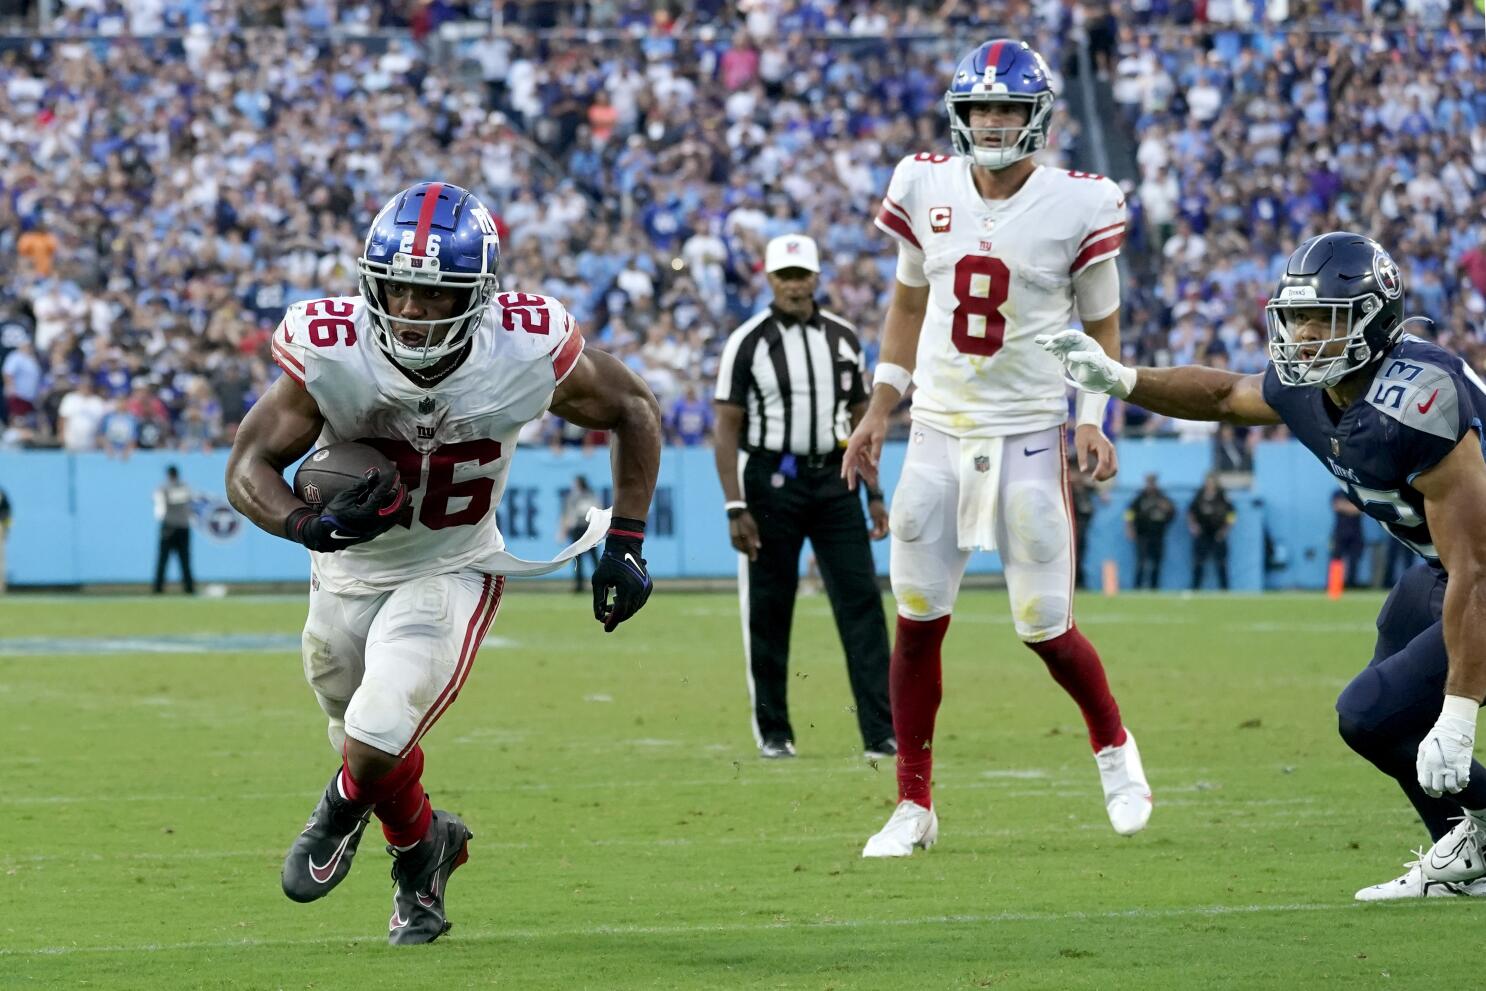 Fantasy Football Playoffs - Starts, Sleepers, Targets (NFC)